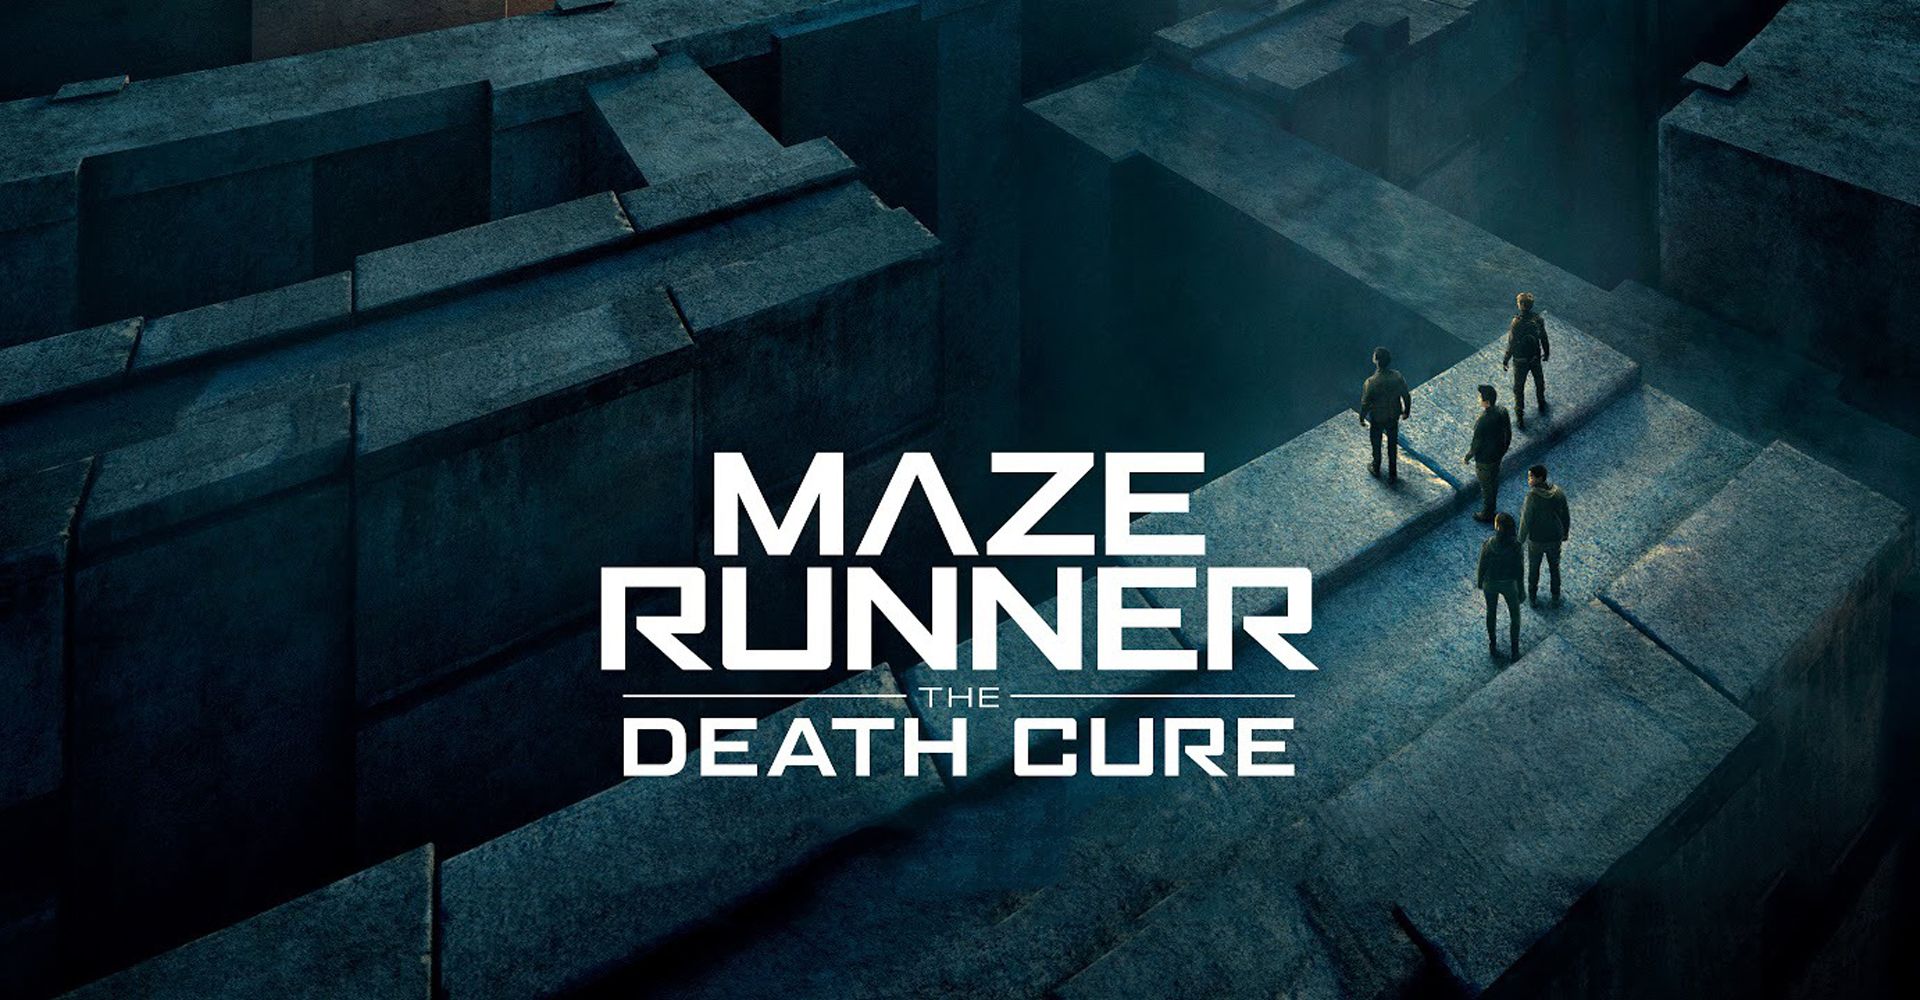 Maze Runner The Death Cure HD Movies, 4k Wallpaper, Image